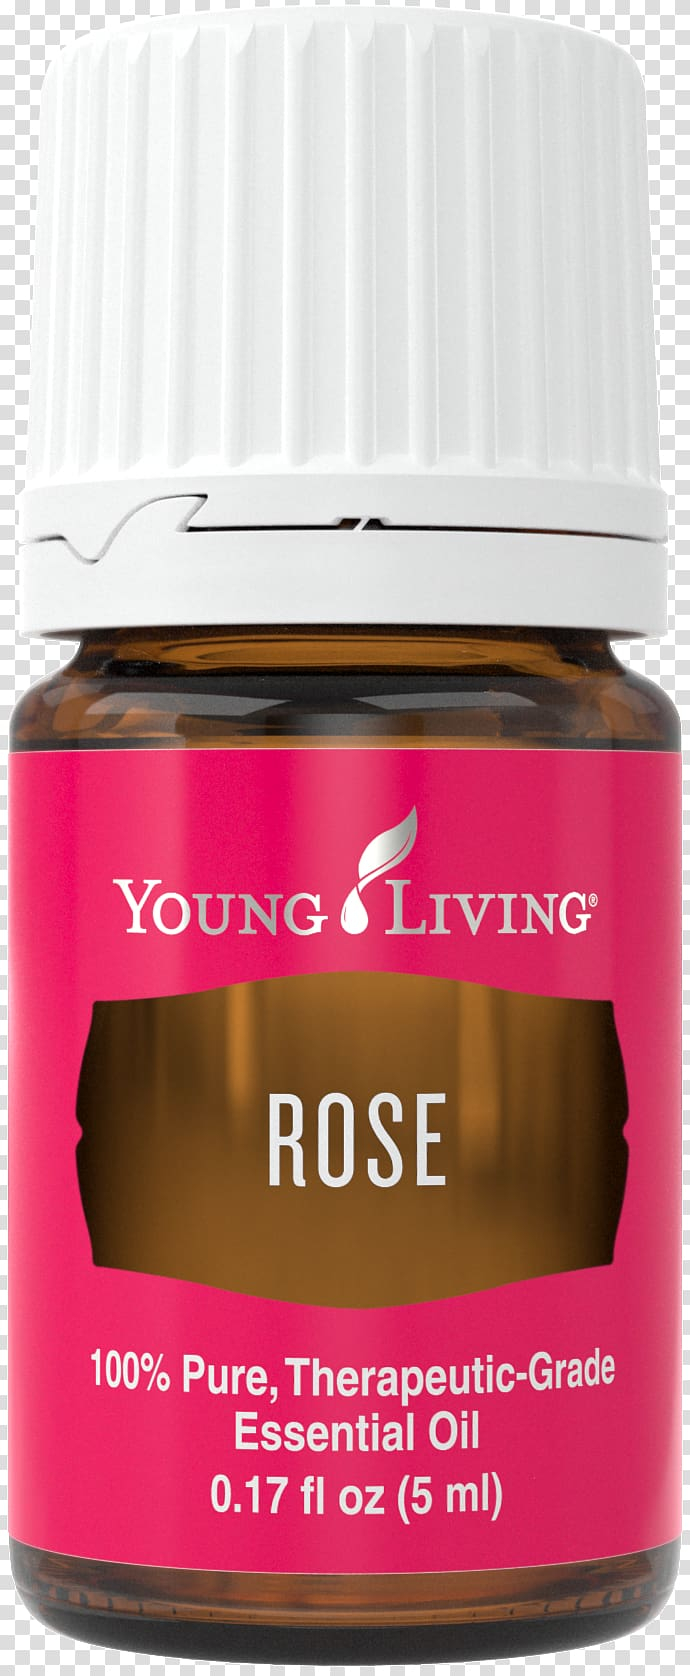 young,living,rose,oil,essential,damask,miscellaneous,perfume,magenta,aroma compound,eucalyptus oil,valerian,steam distillation,sandalwood,bergamot essential oil,blend,mentha spicata,liquid,gum trees,flavor,young living,rose oil,essential oil,damask rose,rose - oil,png clipart,free png,transparent background,free clipart,clip art,free download,png,comhiclipart